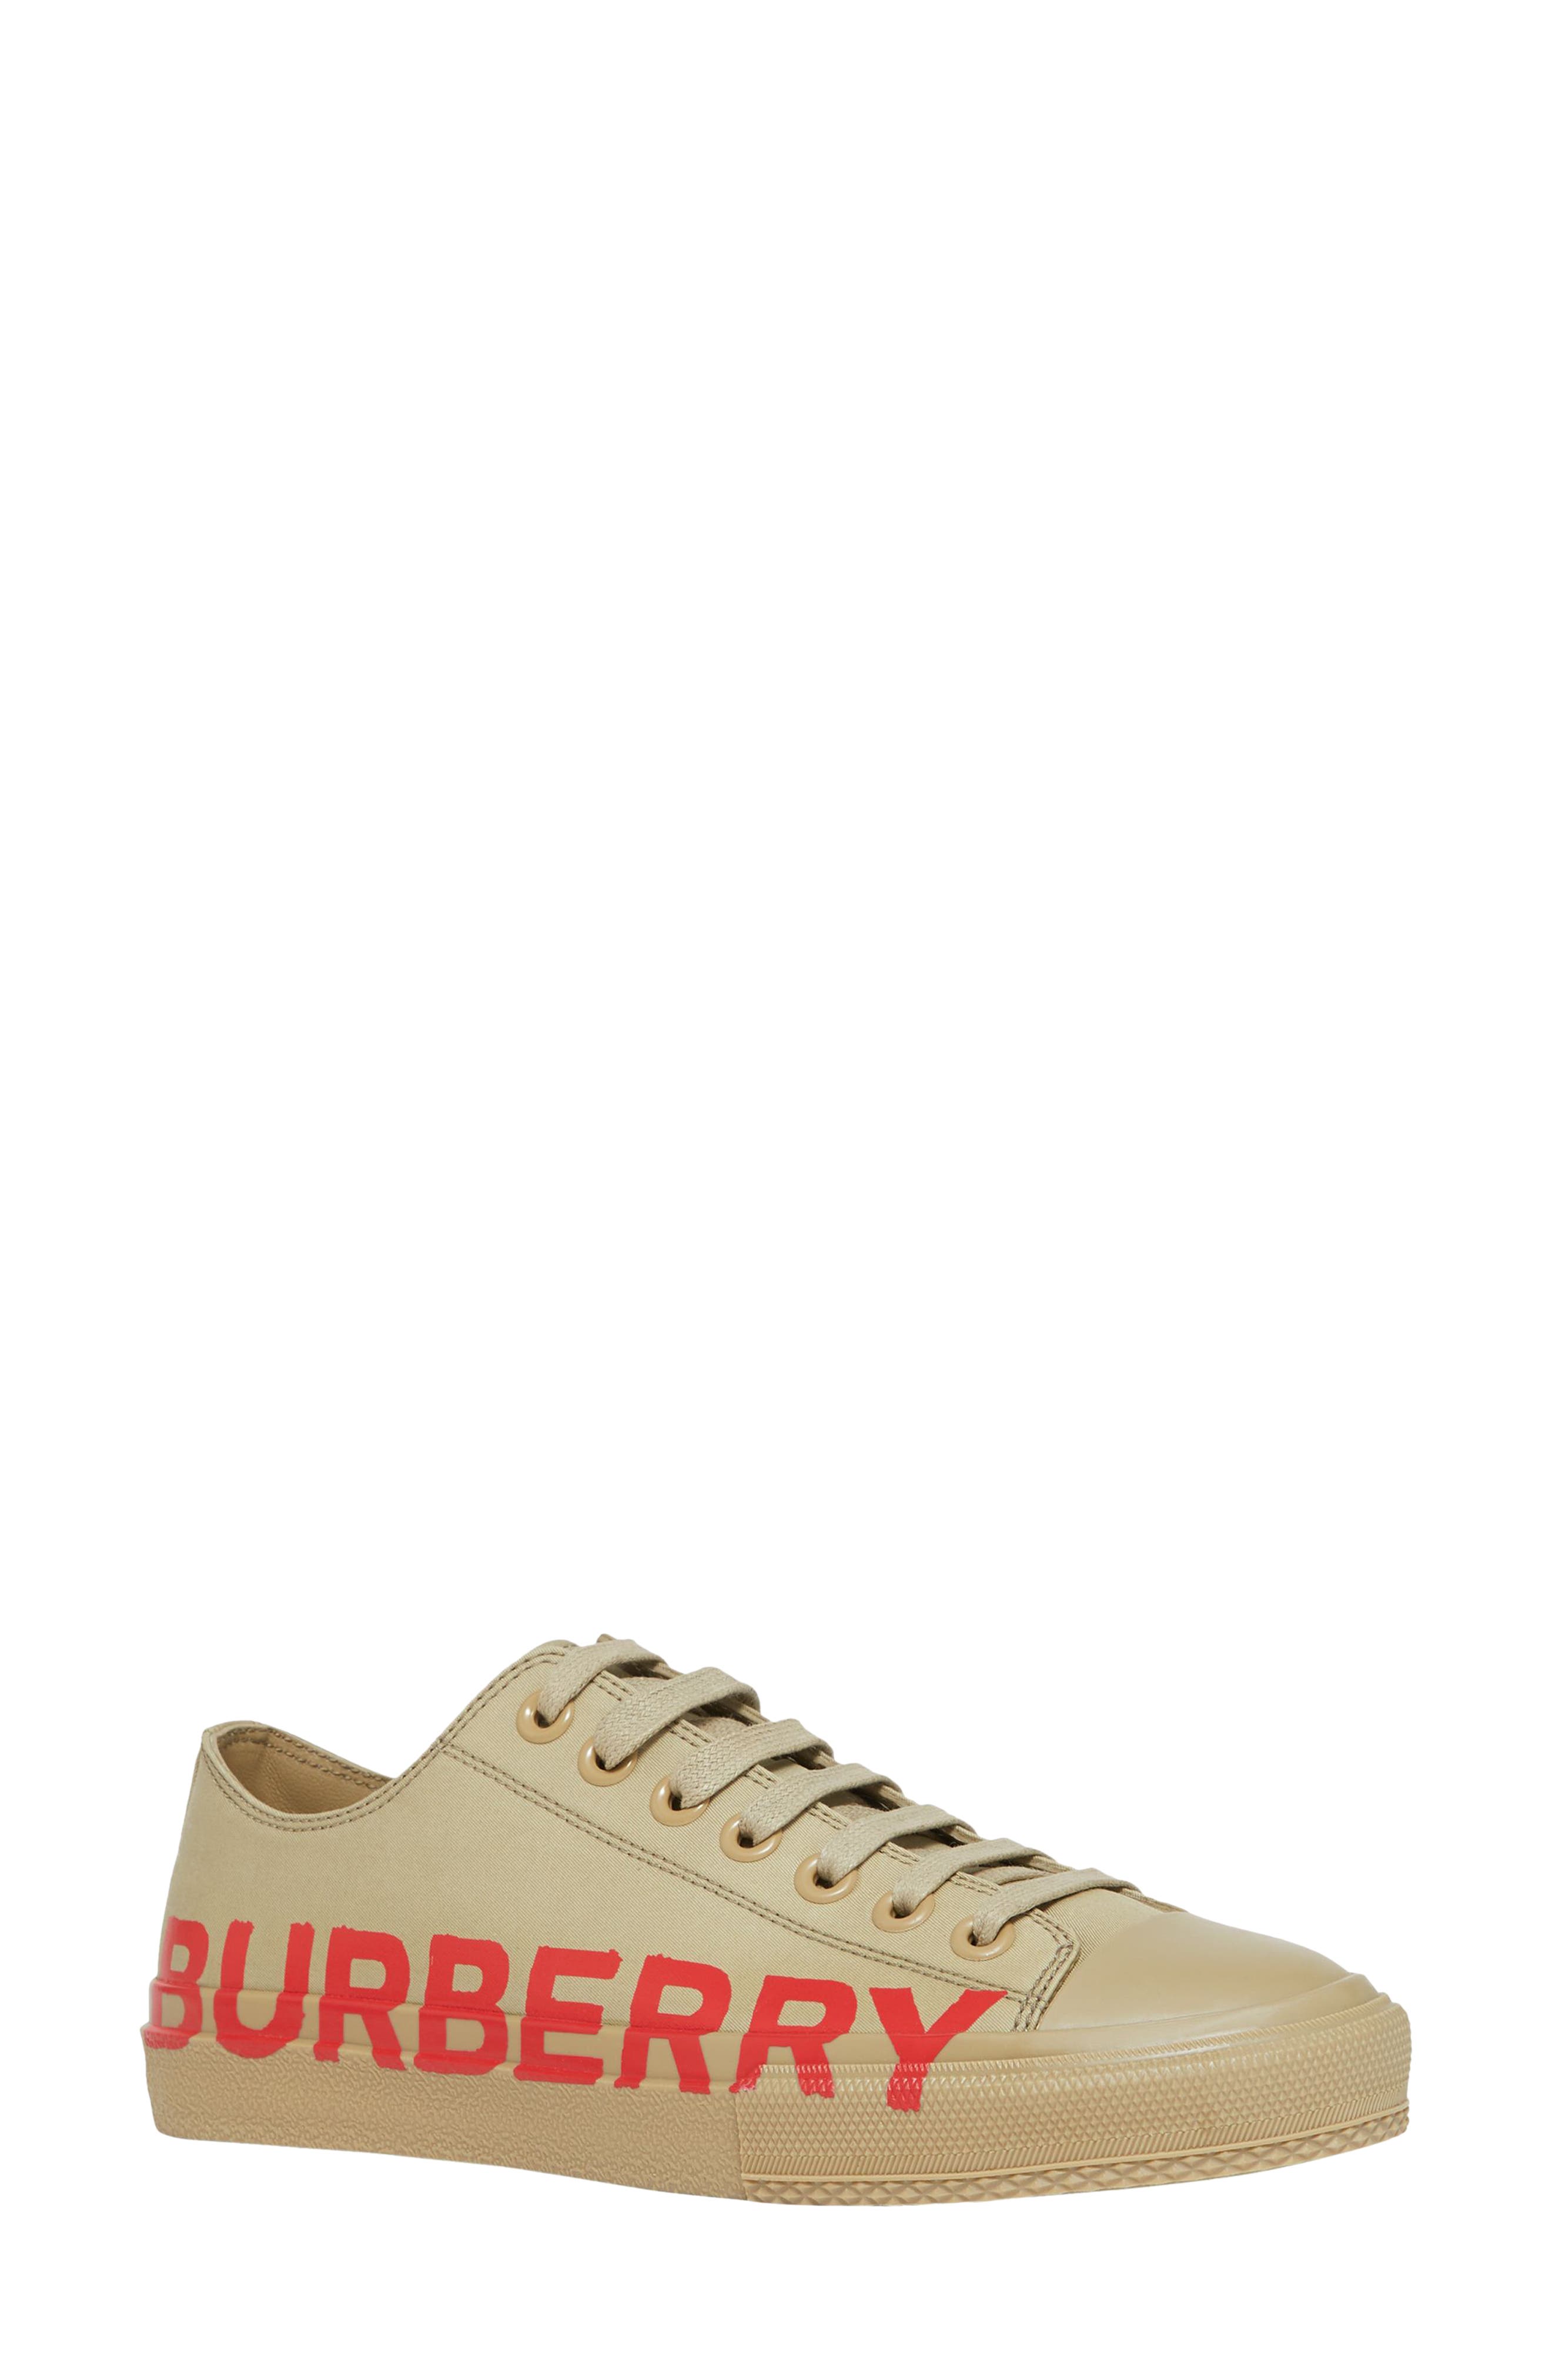 burberry shoes nordstrom